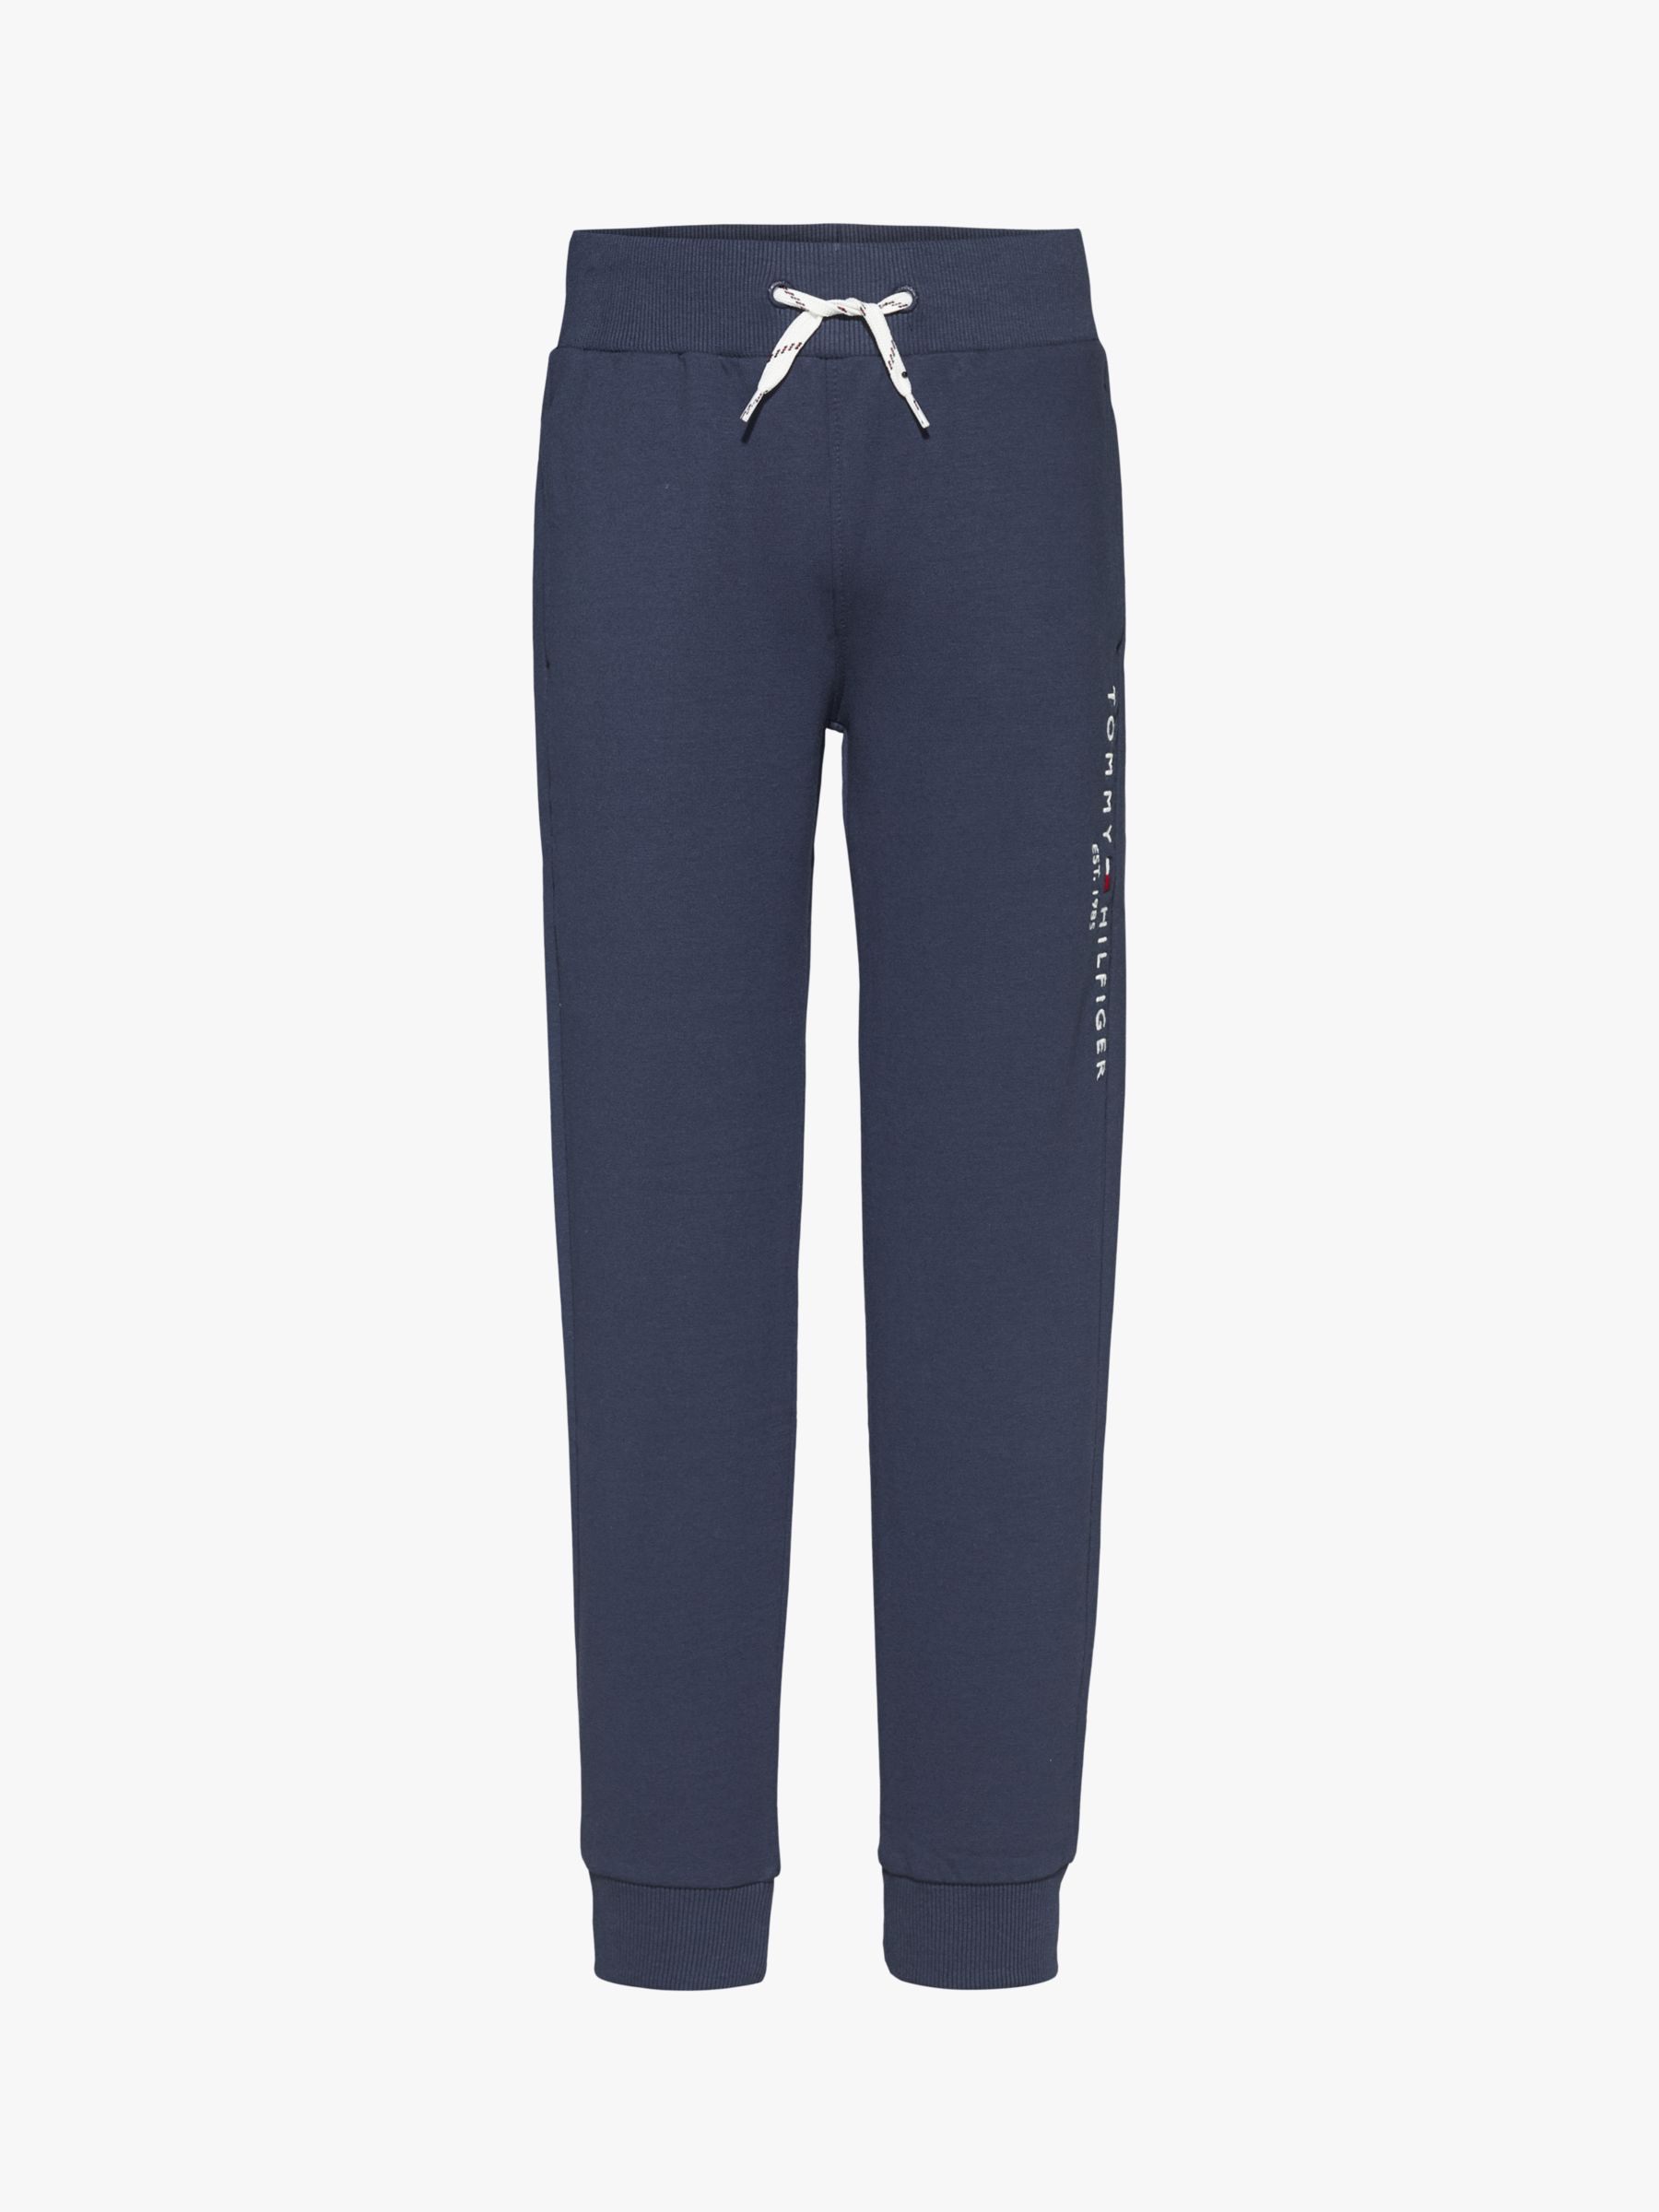 Image of Tommy Hilfiger Boys Essential Organic Cotton Blend Tapered Joggers Twilight Navy